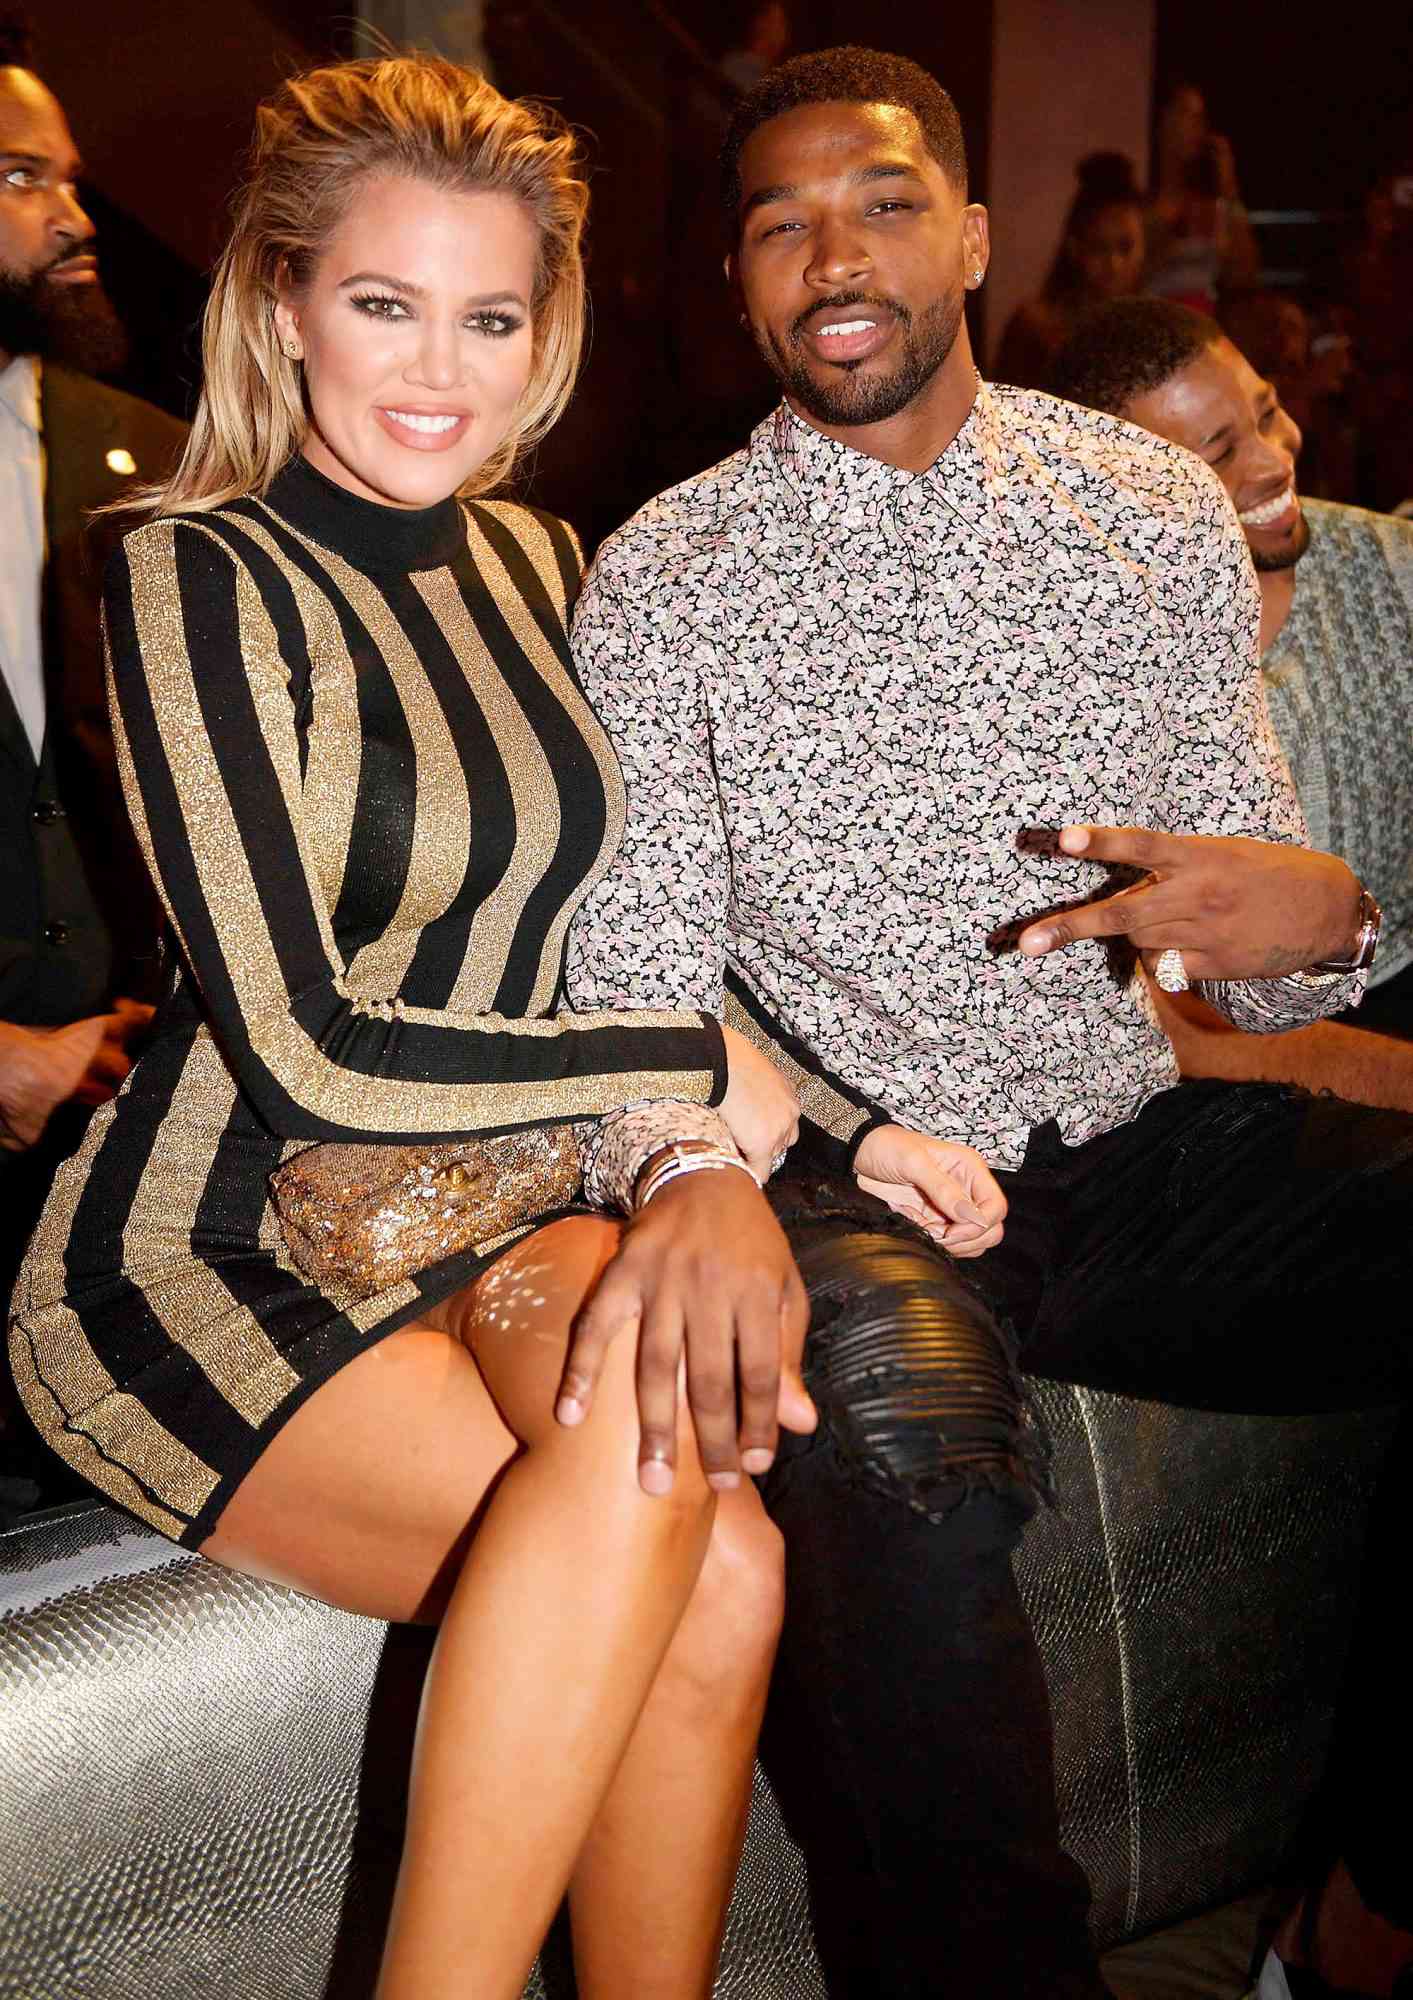 Khloe Kardashian And Tristan Thompson at LIV at Fontainebleau